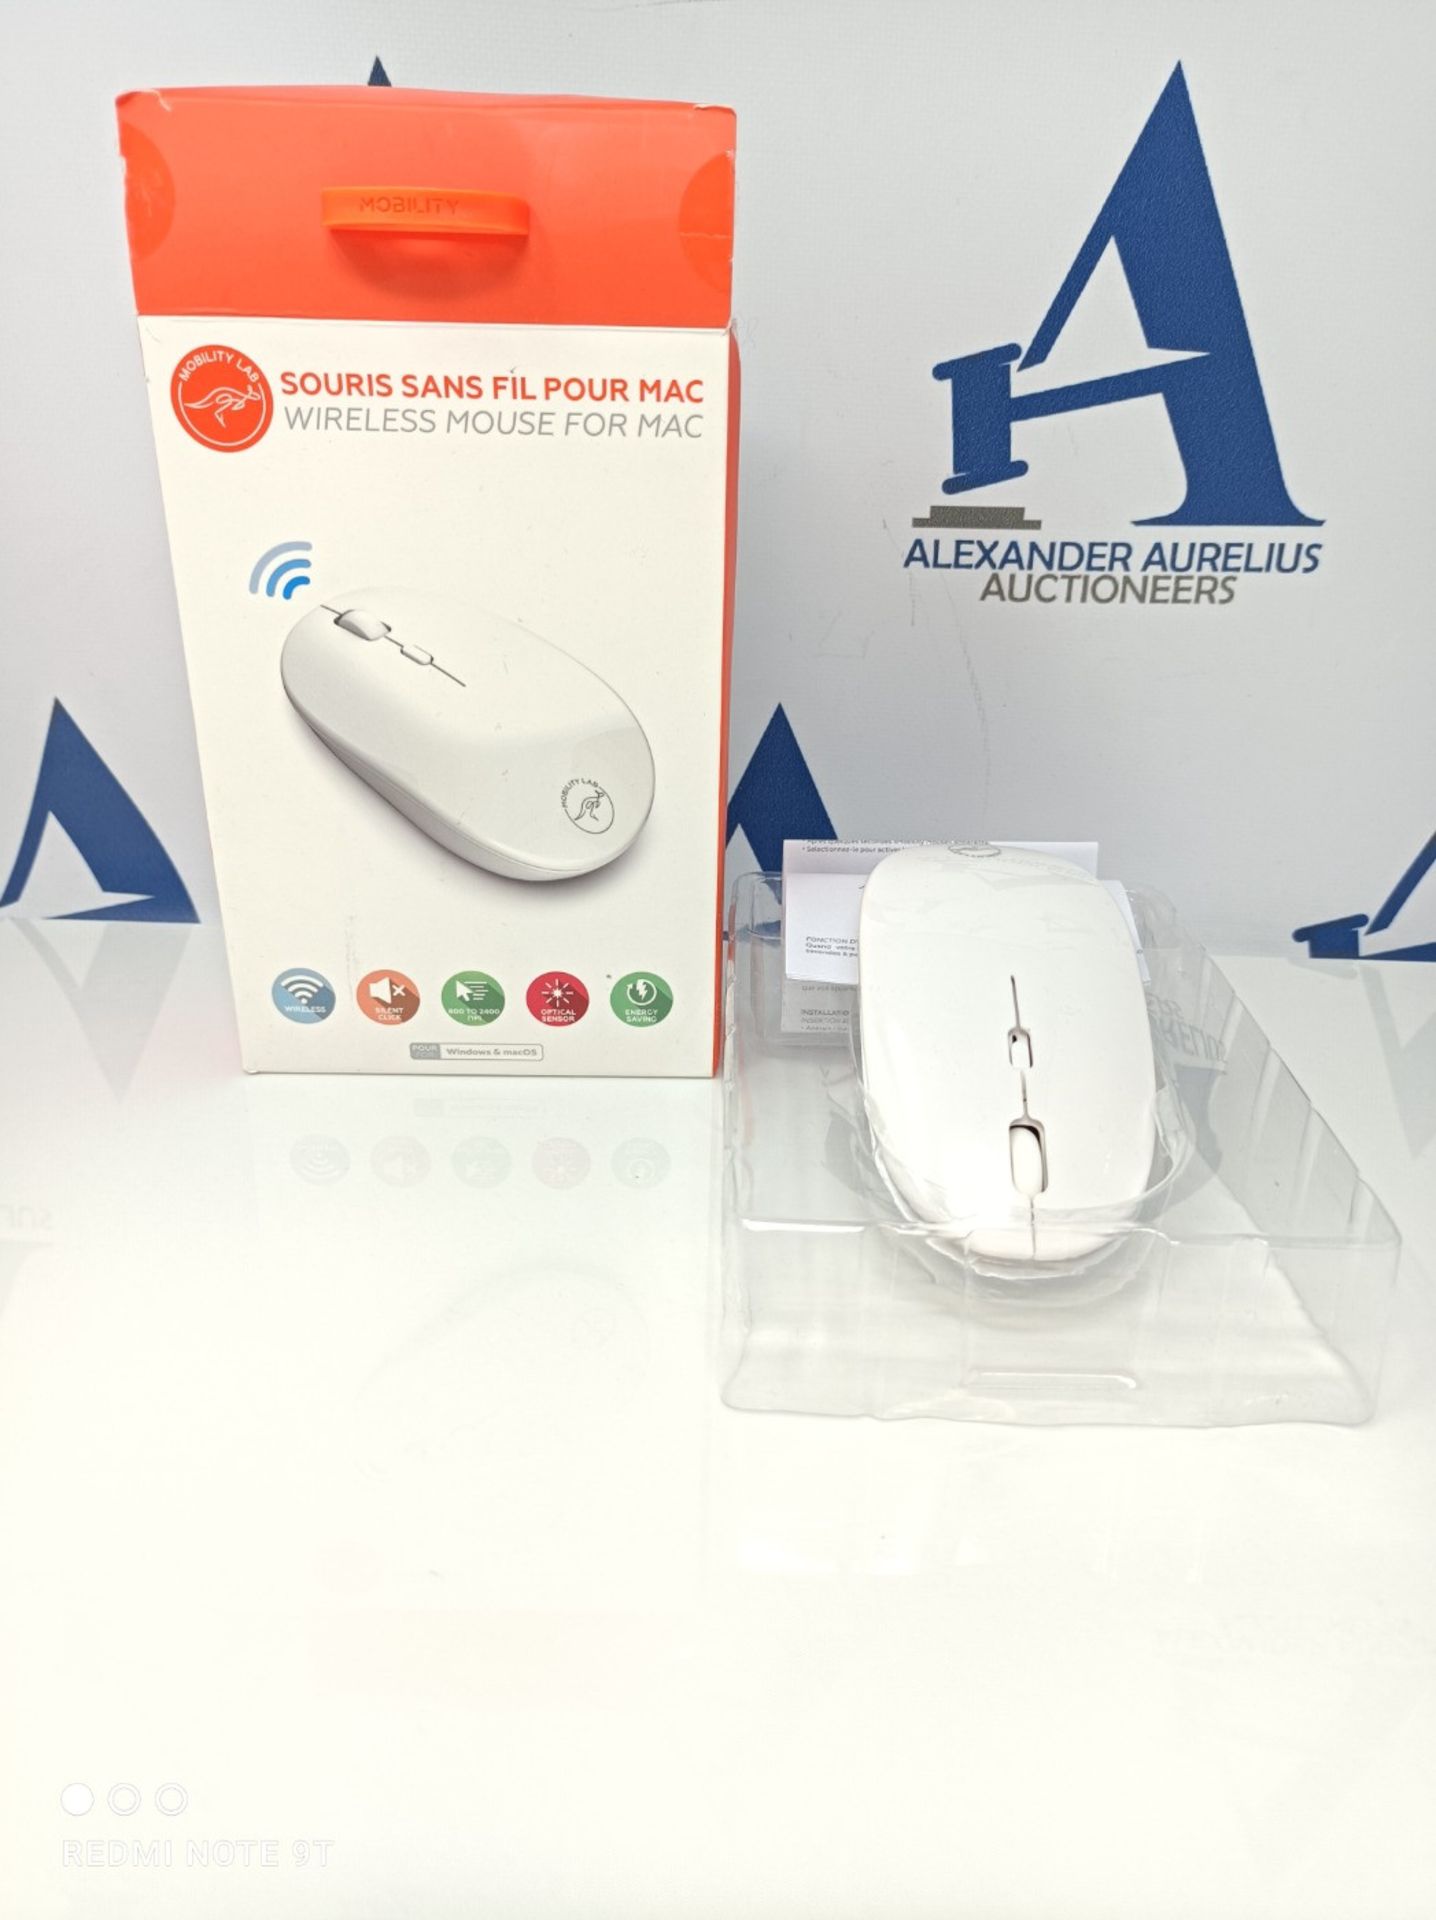 Mobility Lab ML301877 Bluetooth Laser Mouse 1600 DPI for Mac and PC - White - Image 2 of 3